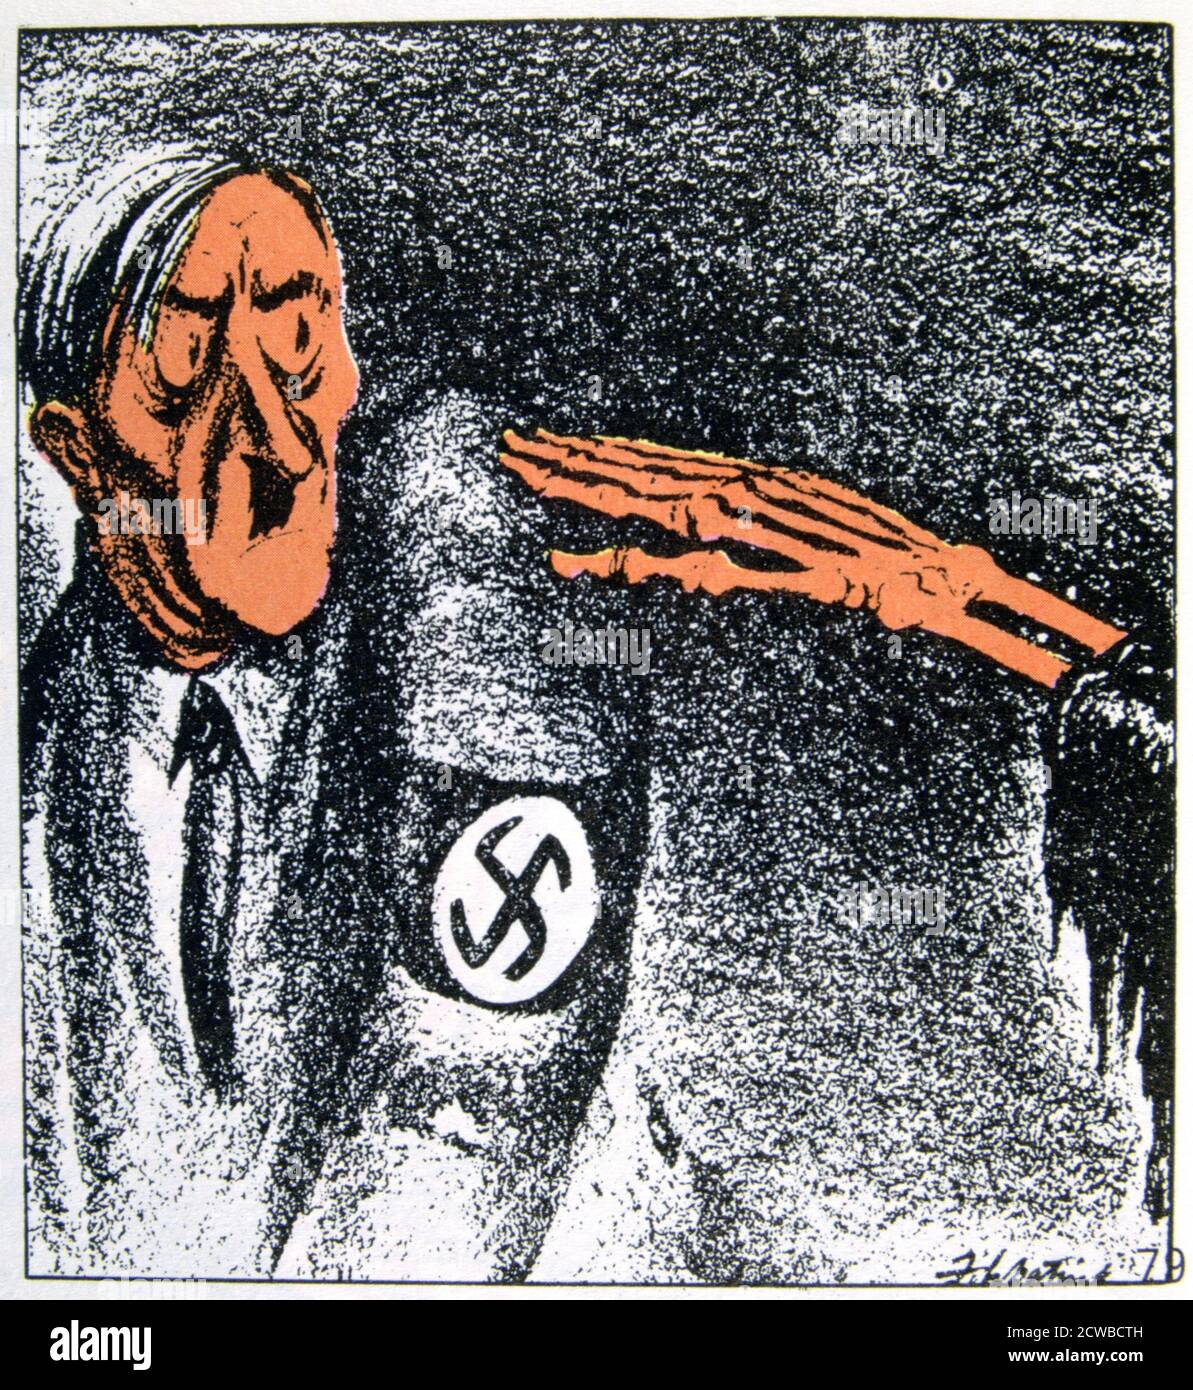 Ultimate Heil!', 20th century. Adolf Hitler saluted by a skeletal hand. A cartoon in the Denver Post by American artist Daniel Fitzpatrick. Stock Photo